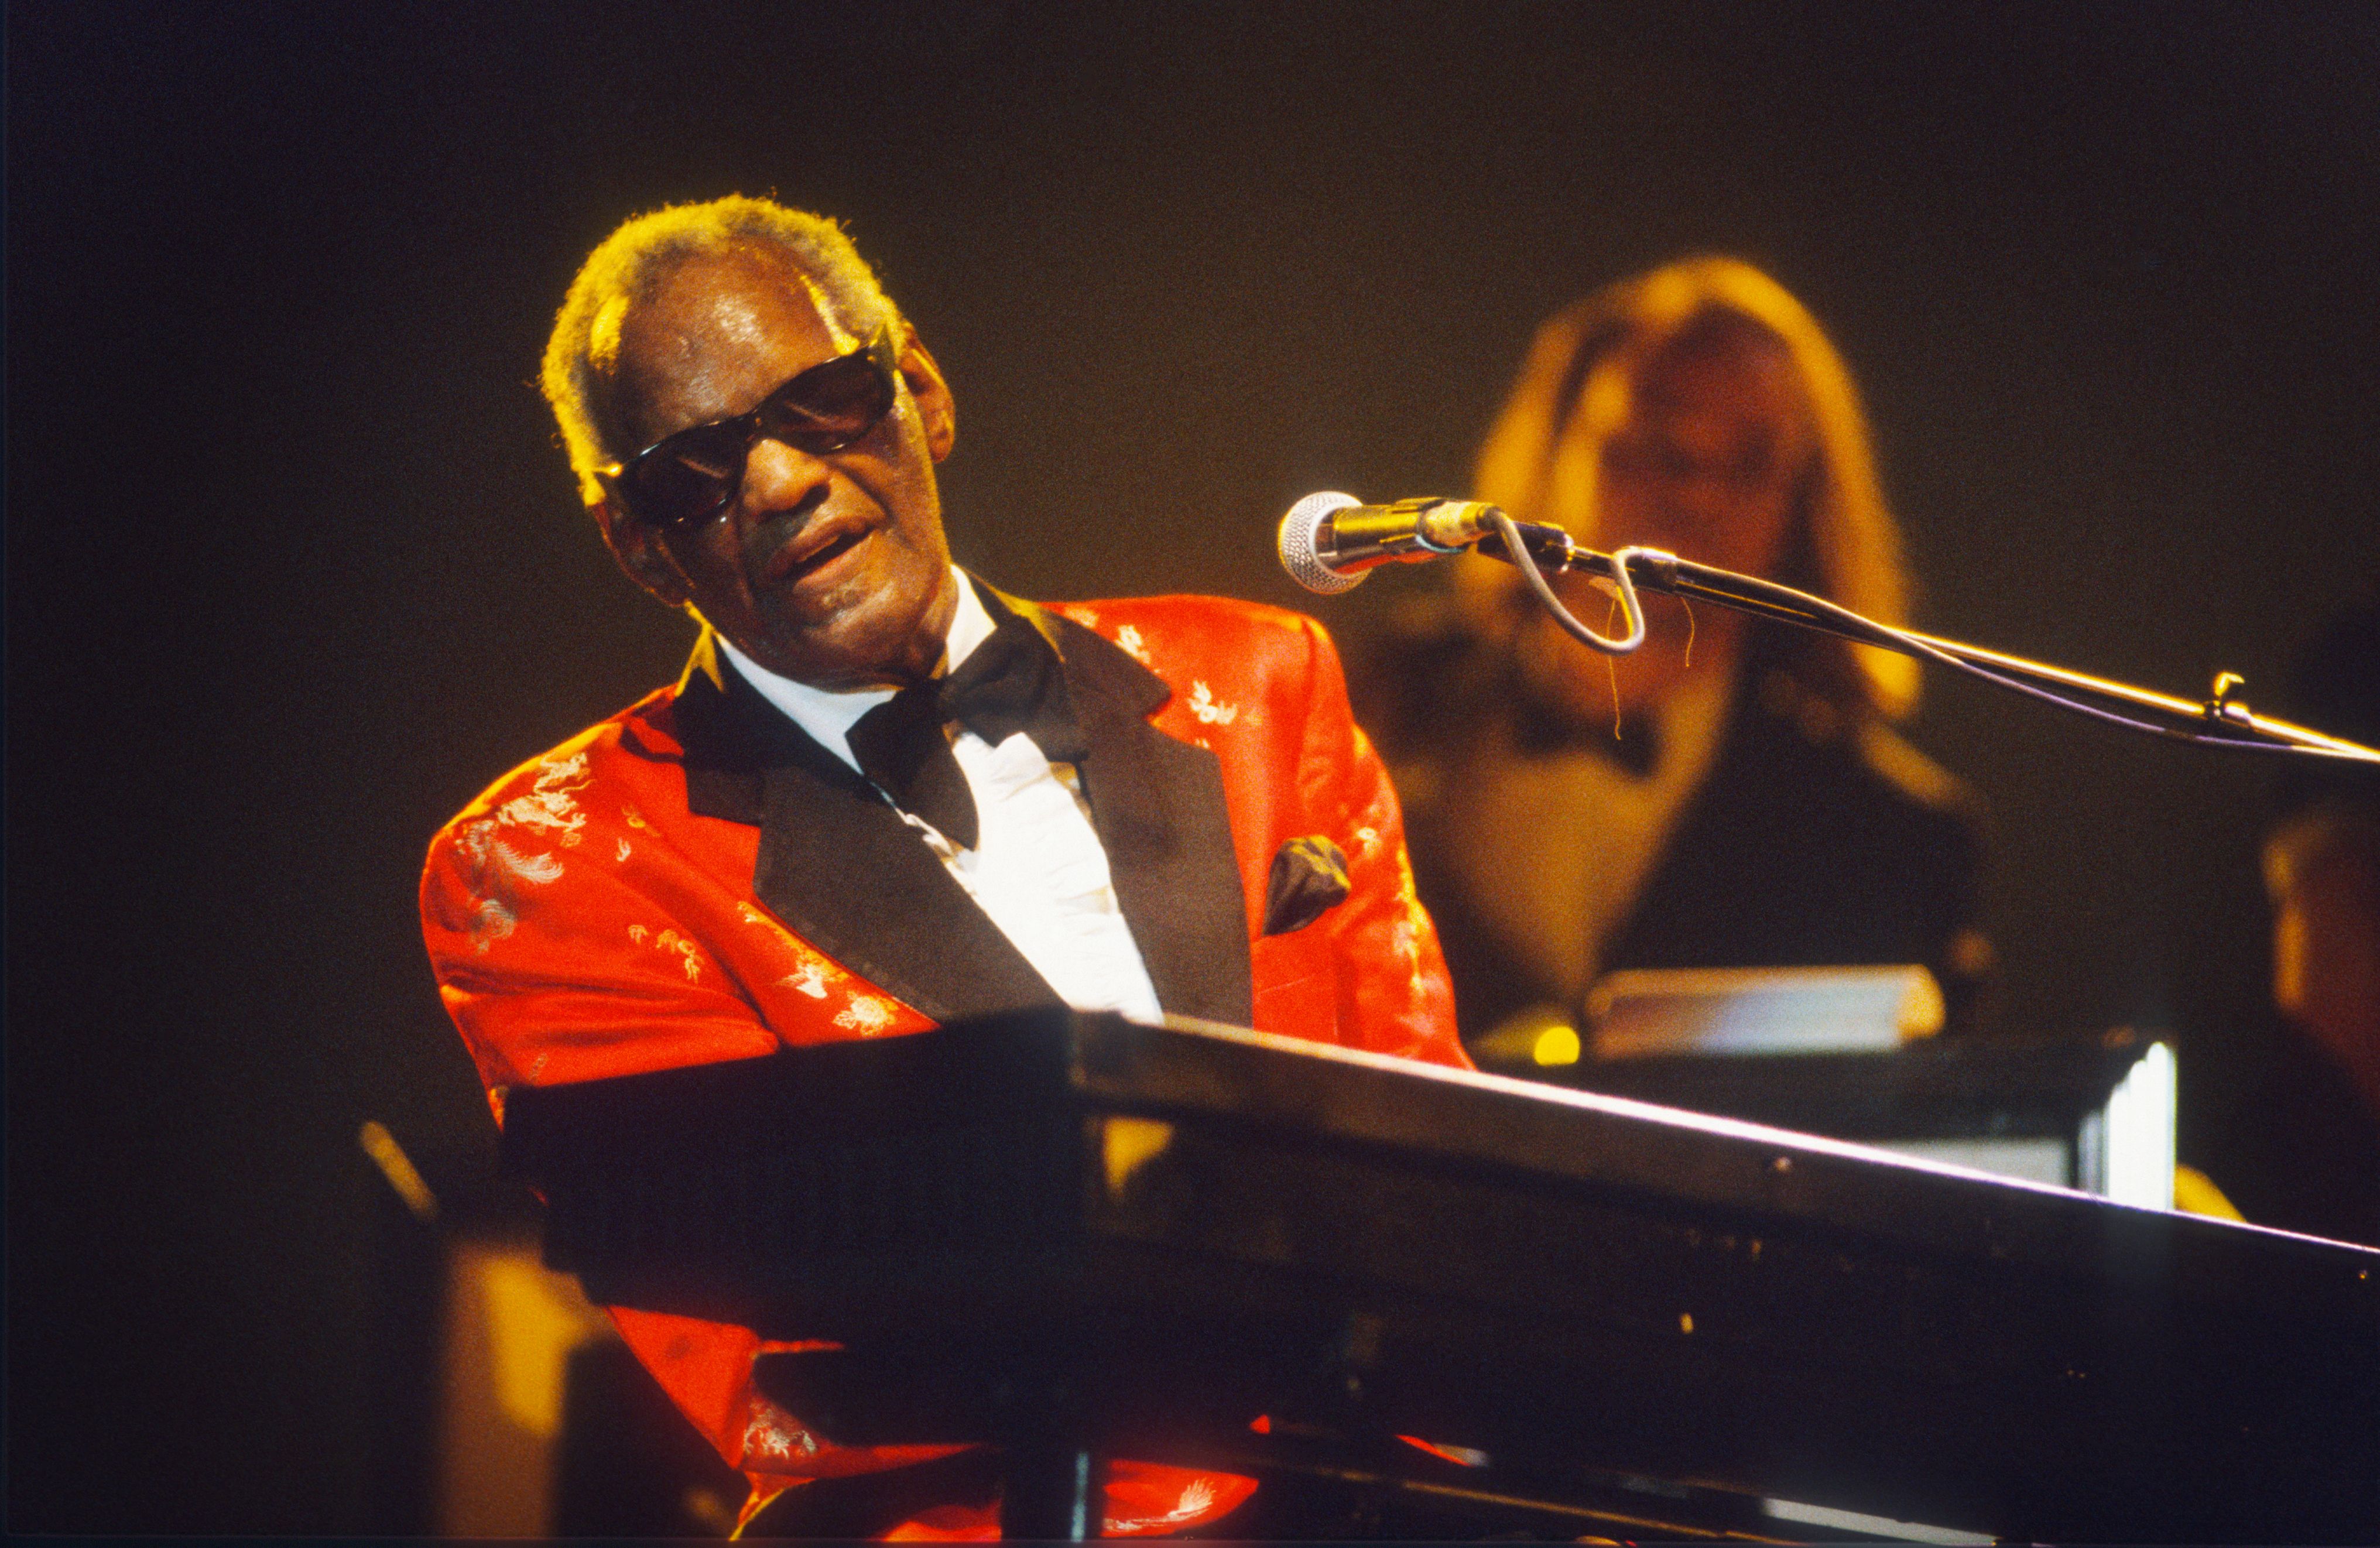 Ray Charles at the Rhythm 'n' Blues Festival in Peer, Belgium on January 07, 1994 | Photo: Gie Knaeps/Getty Images